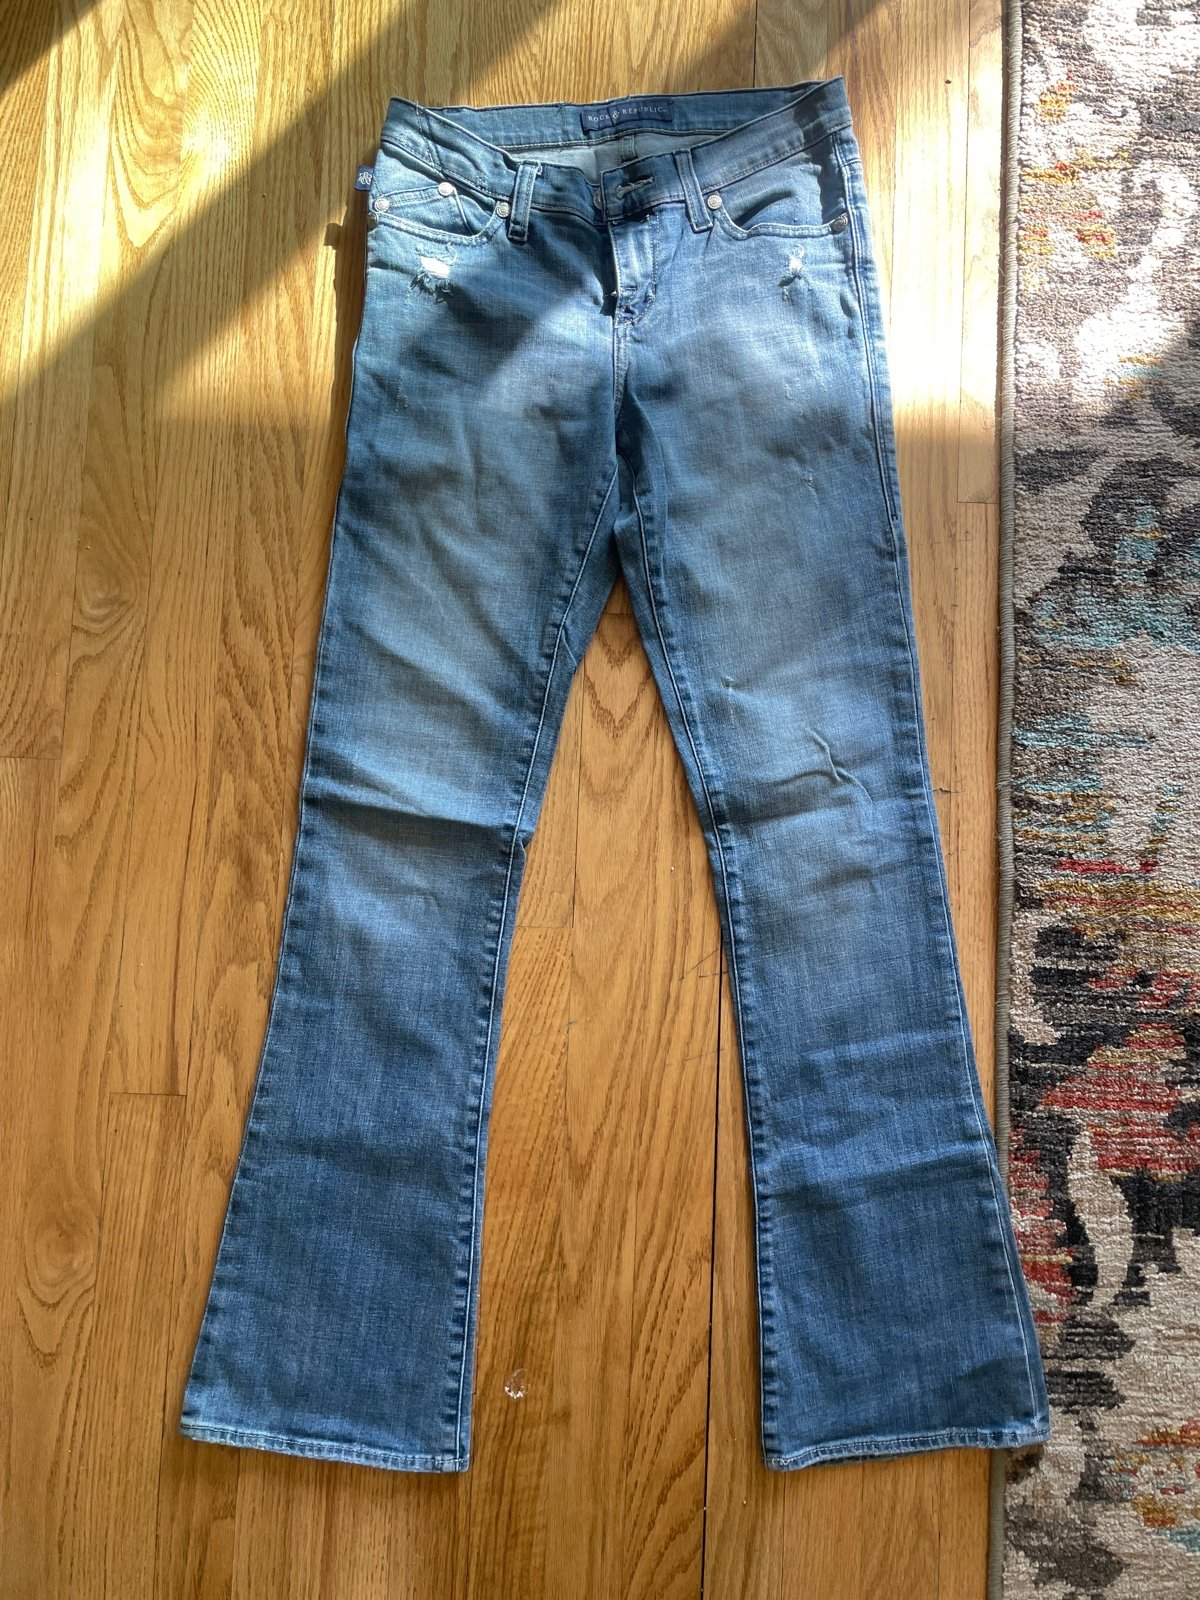 Classic Size 4 rock and republic jeans hR7b85ZSC US Sal